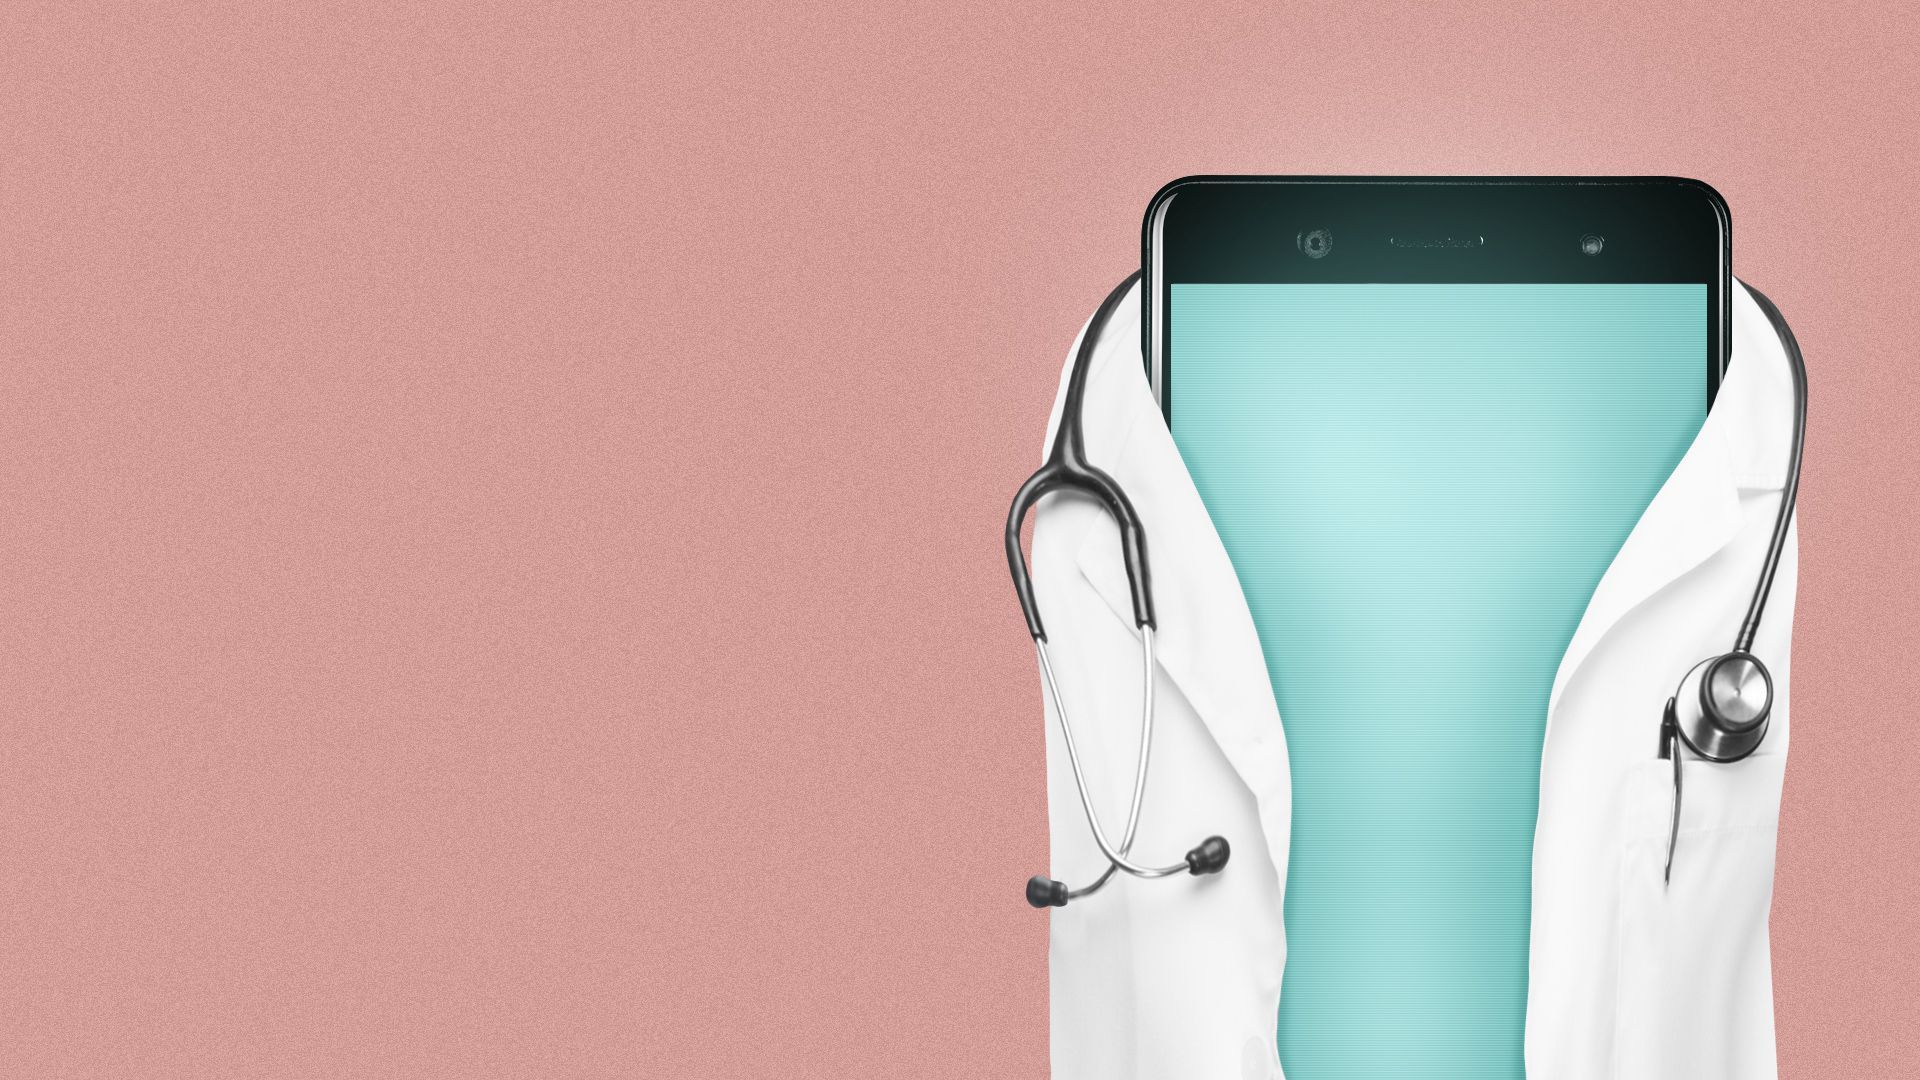 Illustration of a phone wearing a doctor's coat and a stethoscope. 